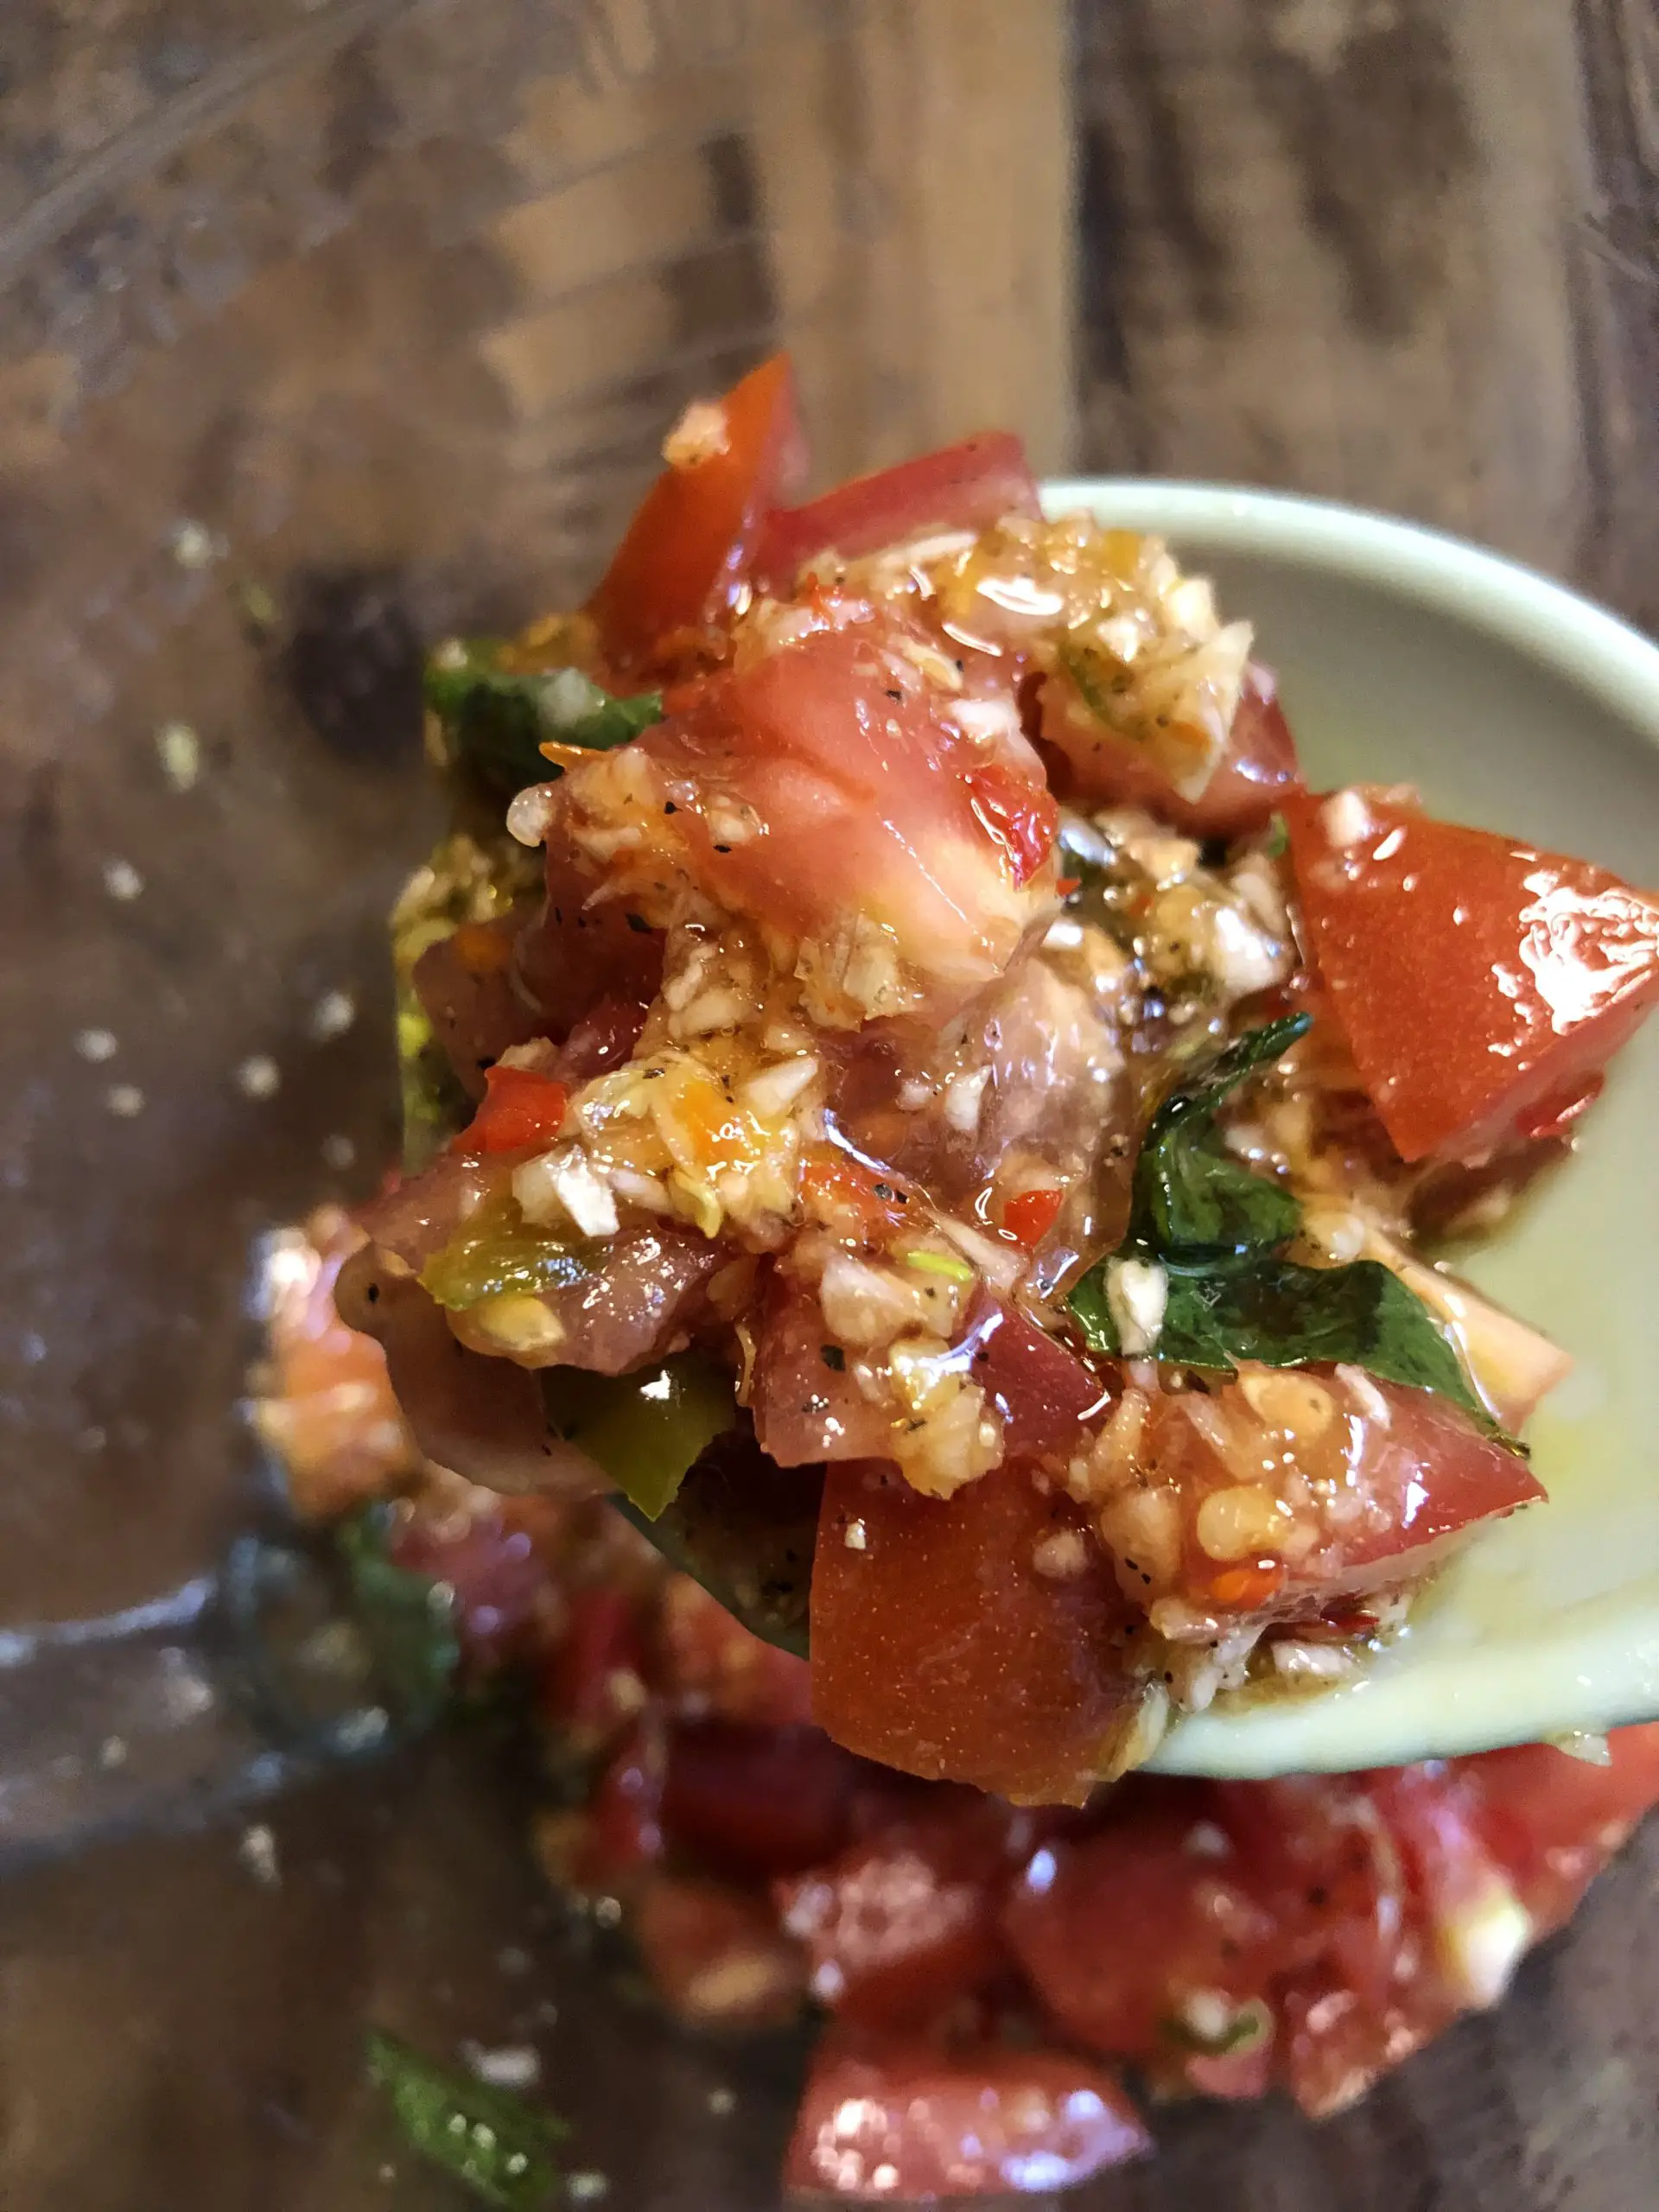 a blue spoon holding a sauce consisting of olive oil, garlic, diced tomatoes, chilies, and basil leaves